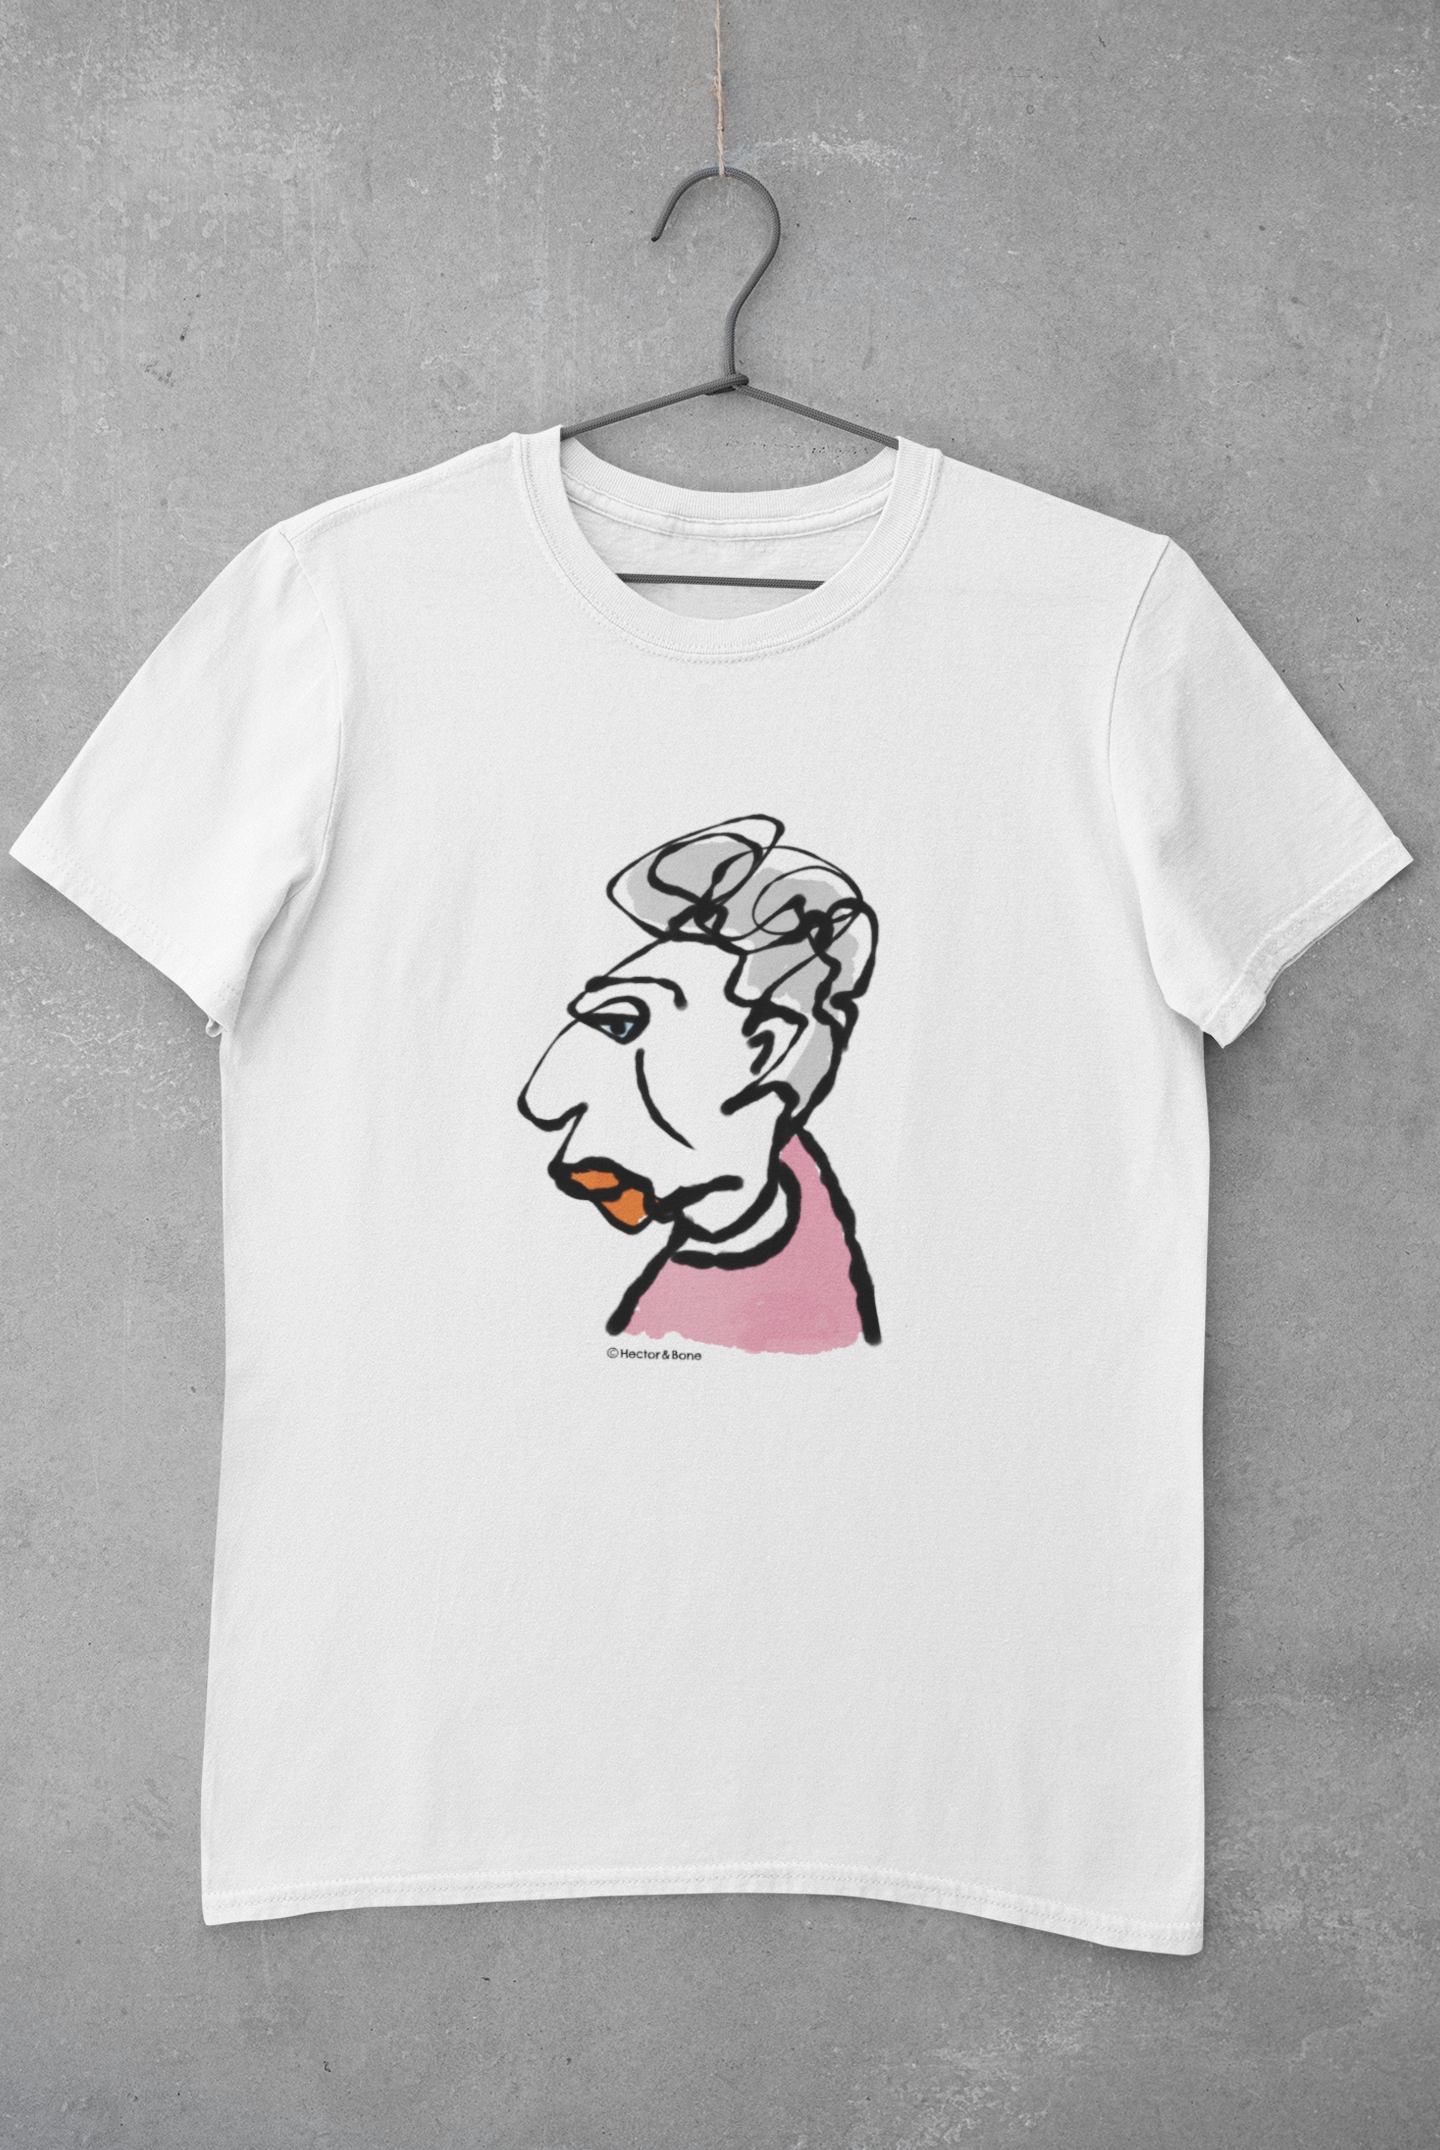 Glamorous Granny T-shirt - Original illustrated gorgeous granny on classic white grandma t-shirts by Hector and Bone